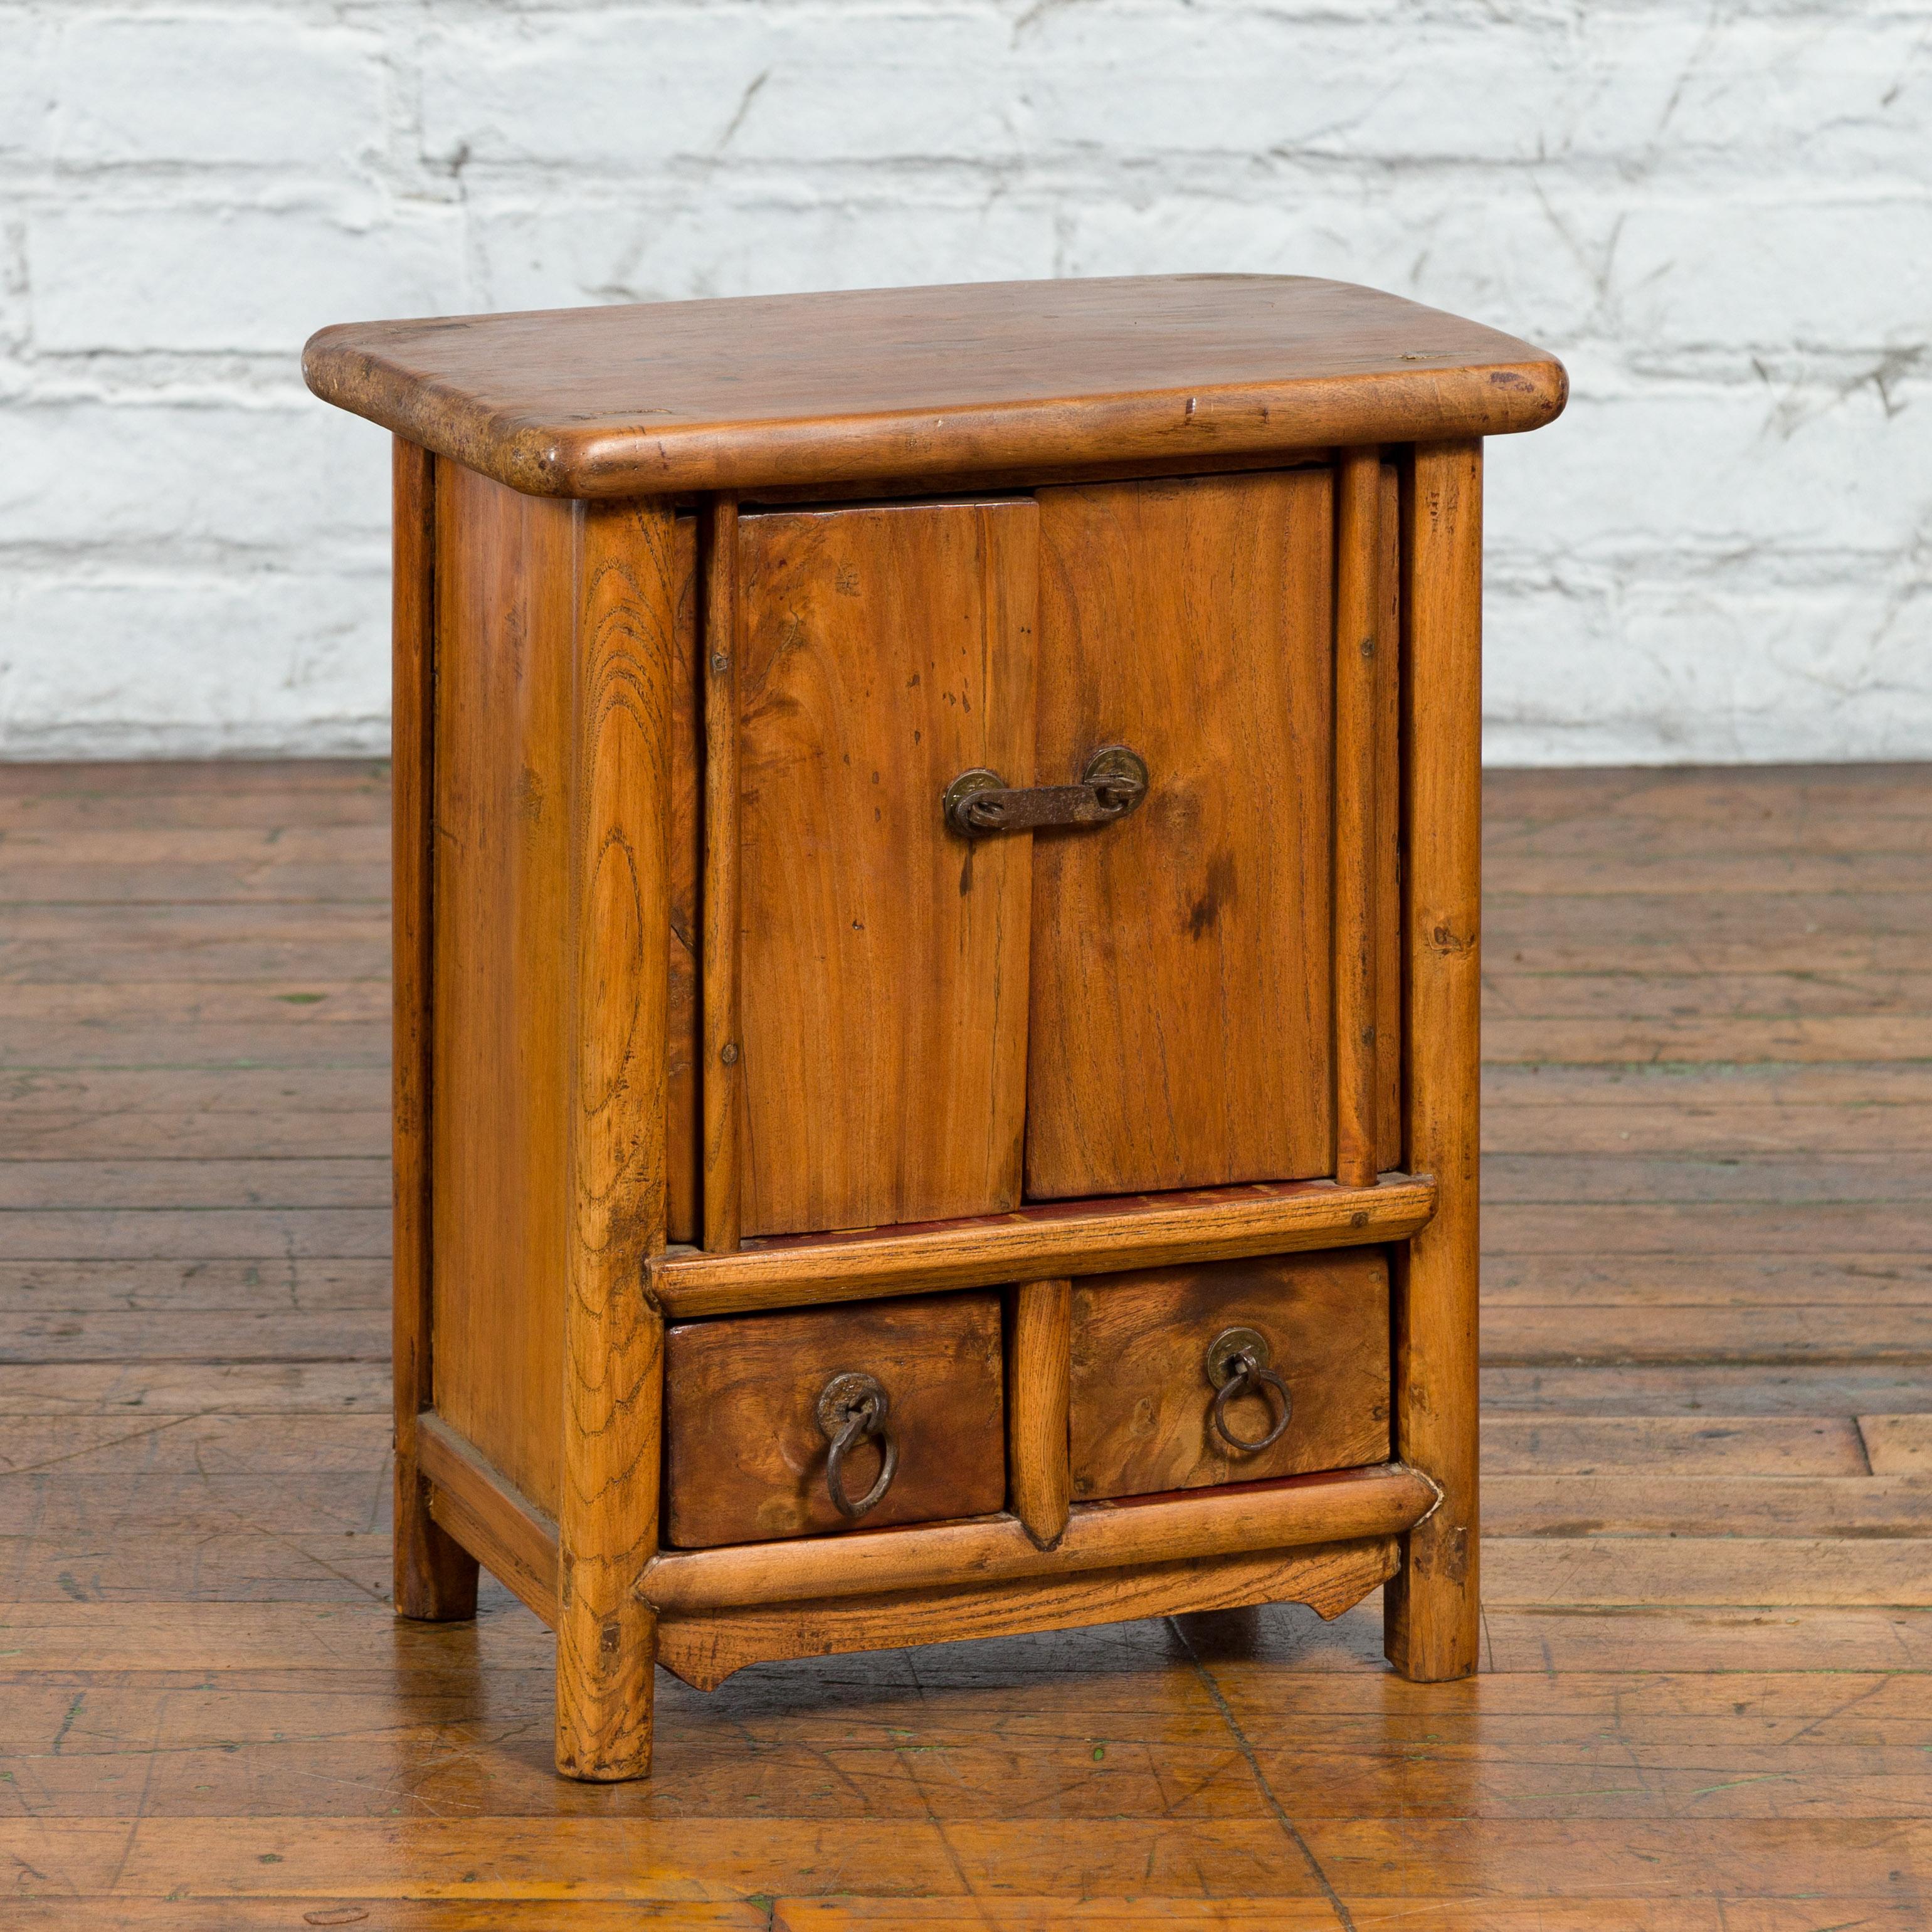 A small Chinese Qing Dynasty elmwood tapering bedside cabinet from the 19th century, with two doors and two drawers. Created in China during the Qing Dynasty, this elmwood bedside cabinet features a rectangular top sitting above two doors fitted